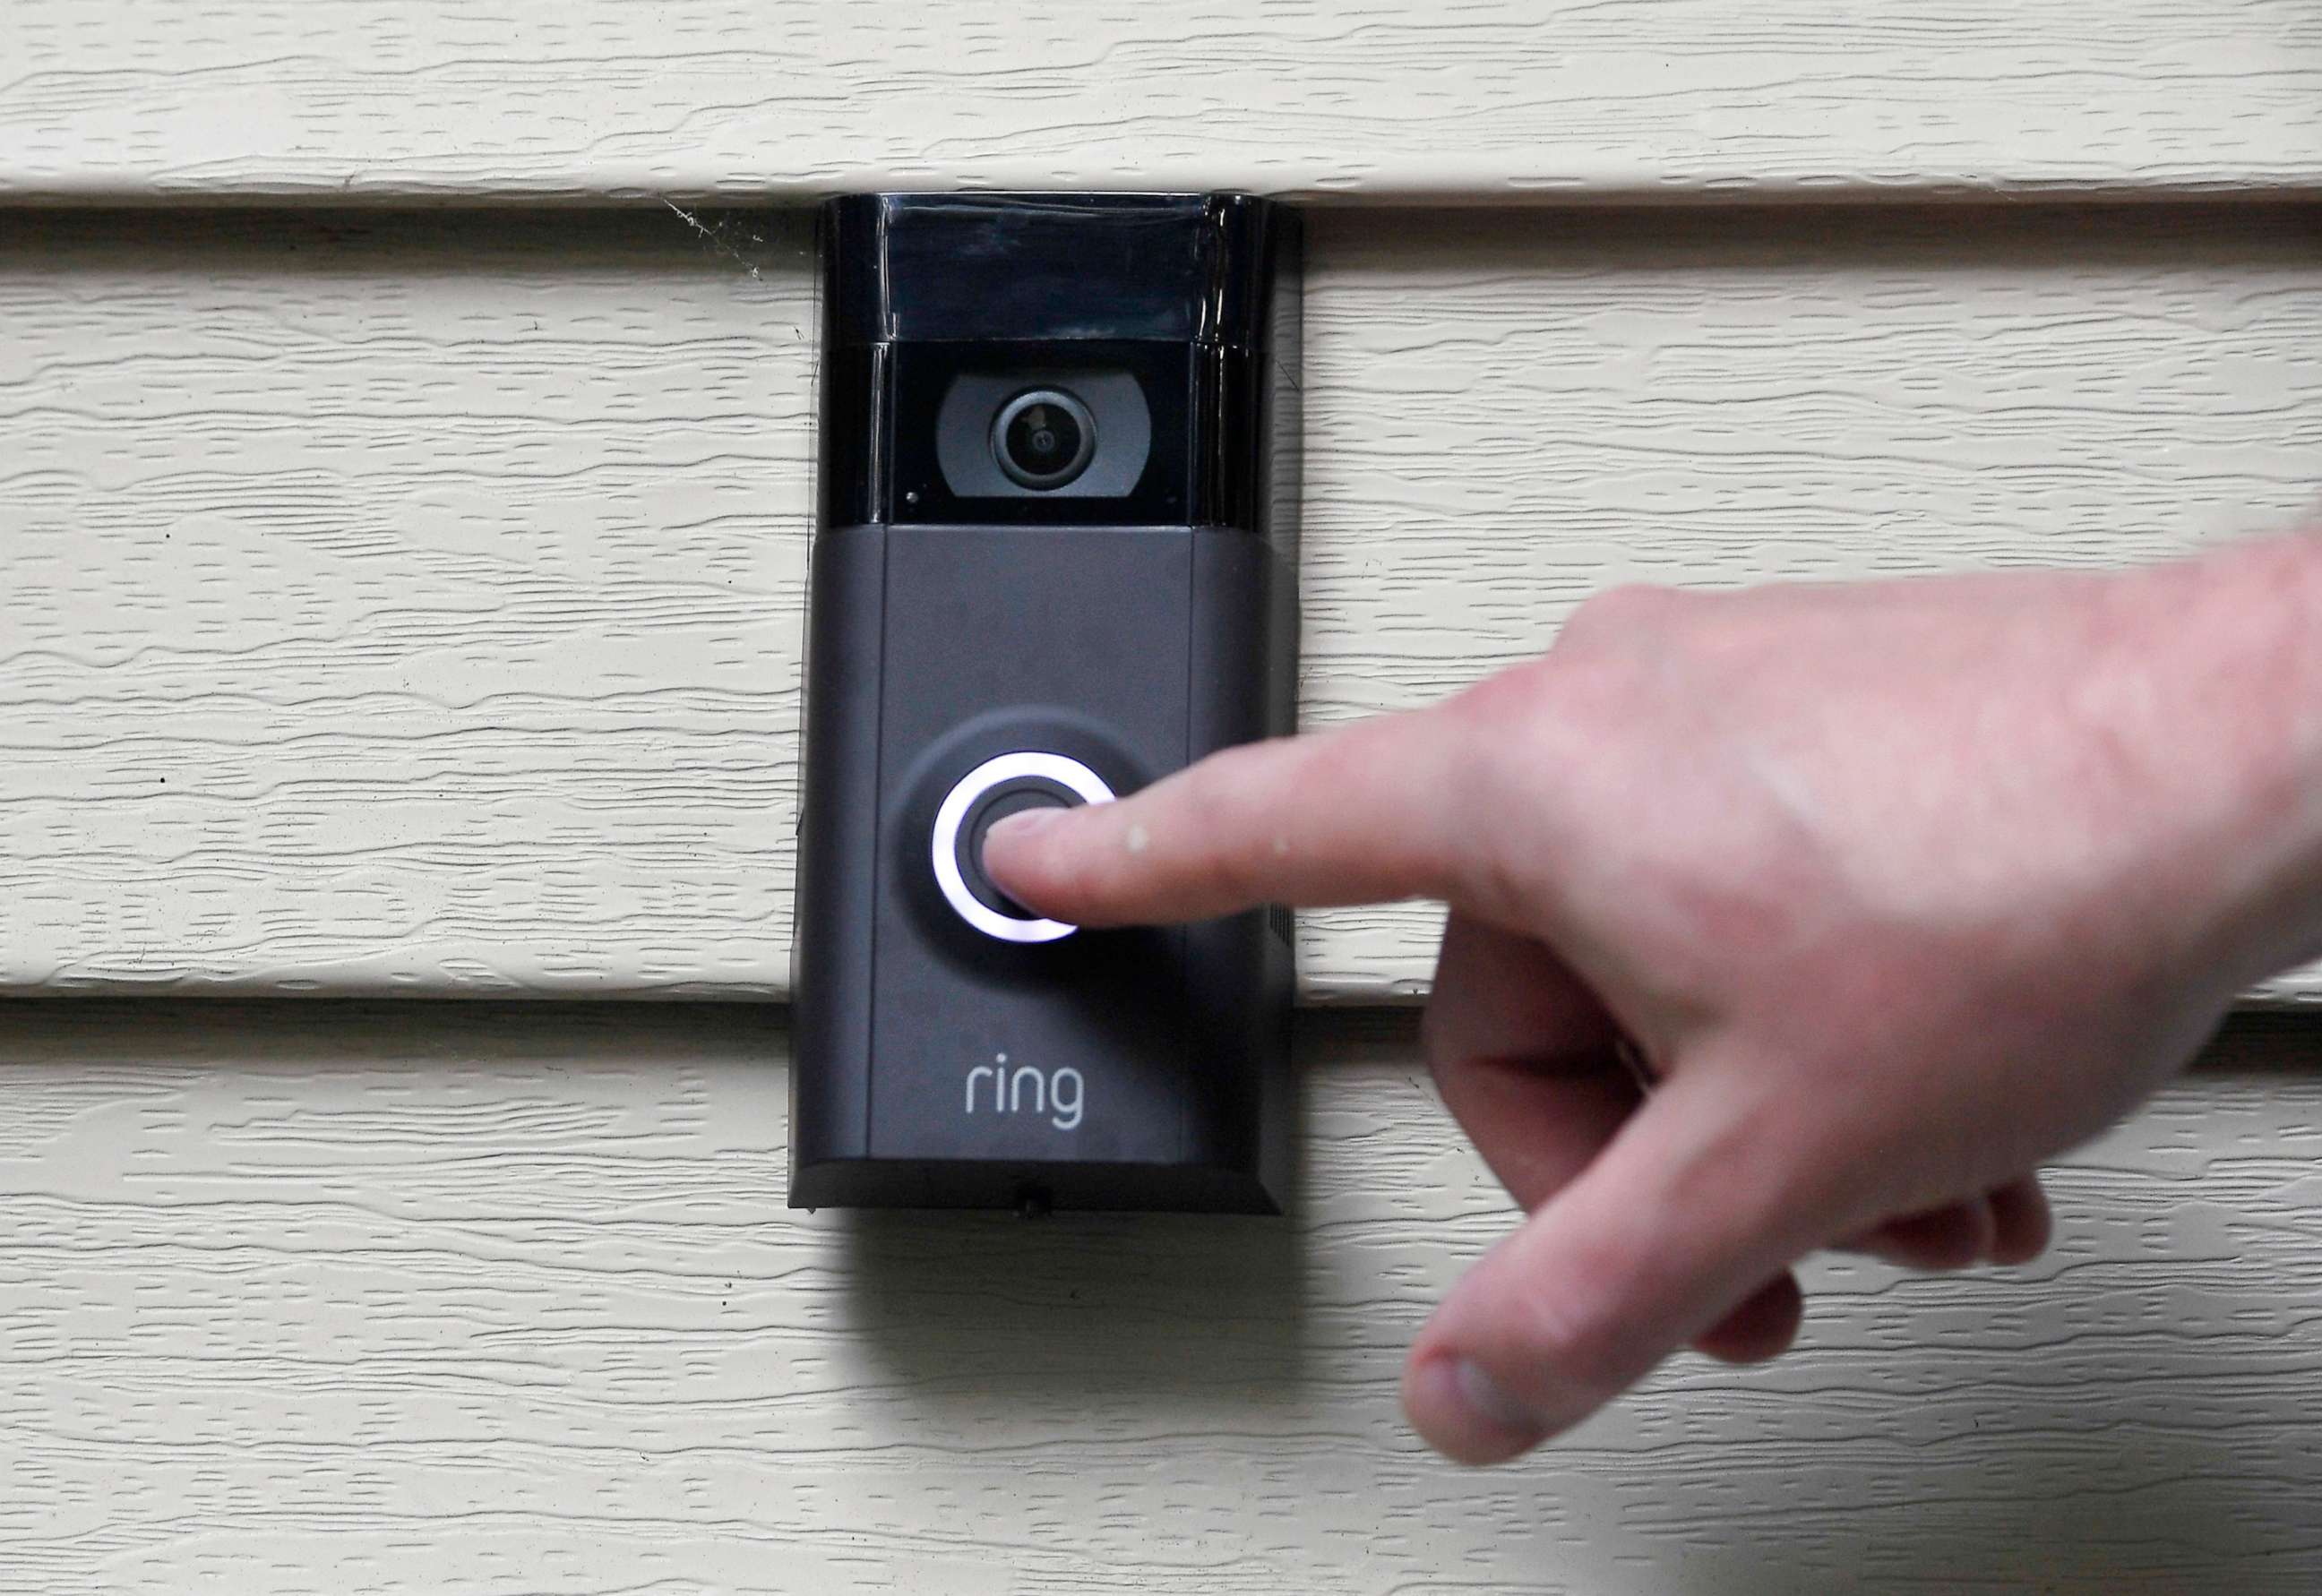 PHOTO: In this July 16, 2019, file photo, Ernie Field pushes the doorbell on his Ring doorbell camera at his home in Wolcott, Conn.